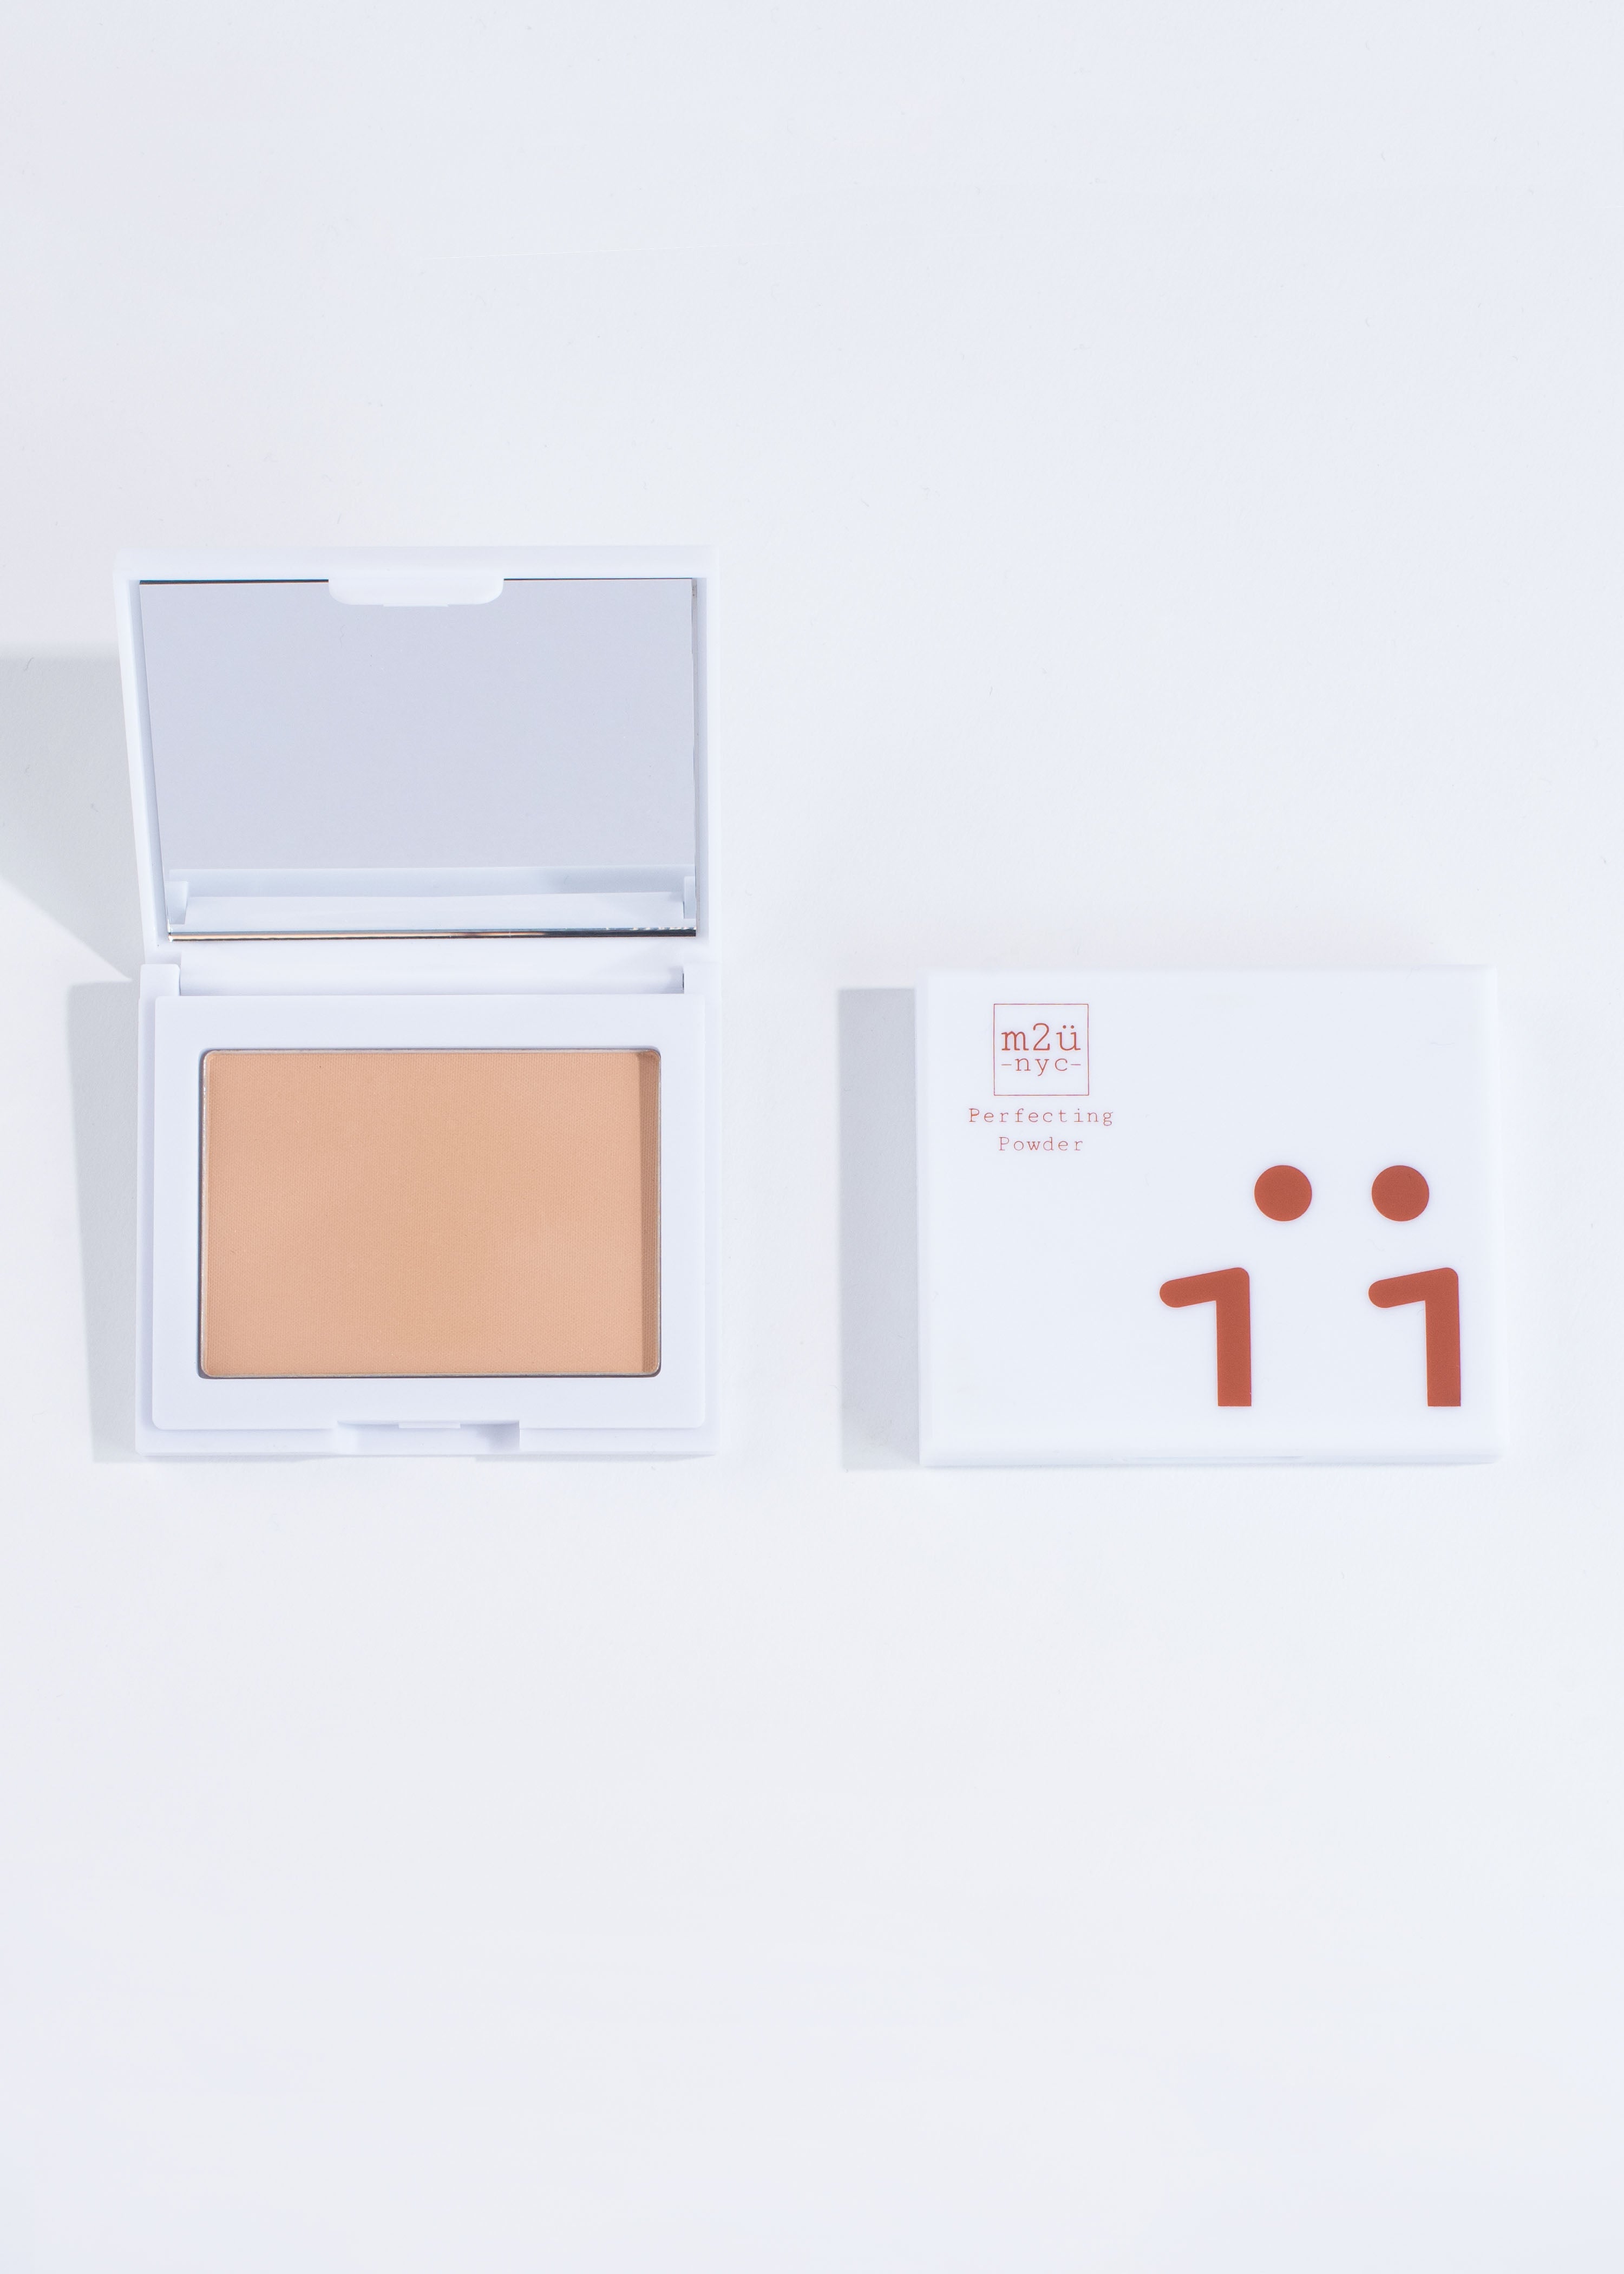 two perfecting powder compacts in shade medium, one open and one closed